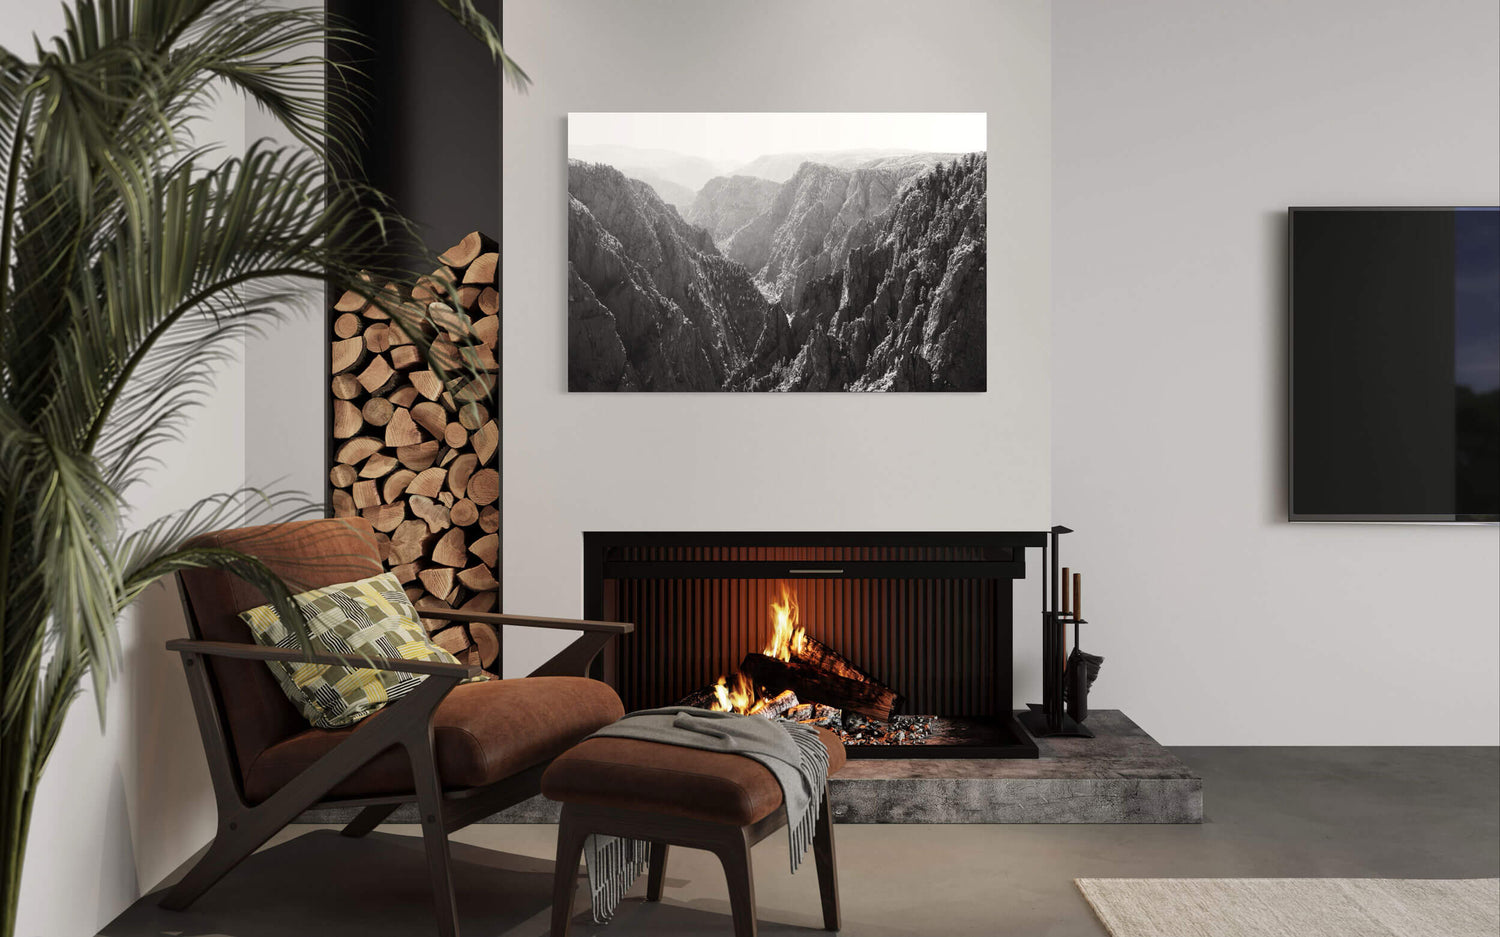 A piece of black and white Colorado art showing the Black Canyon of the Gunnison hangs in a living room.